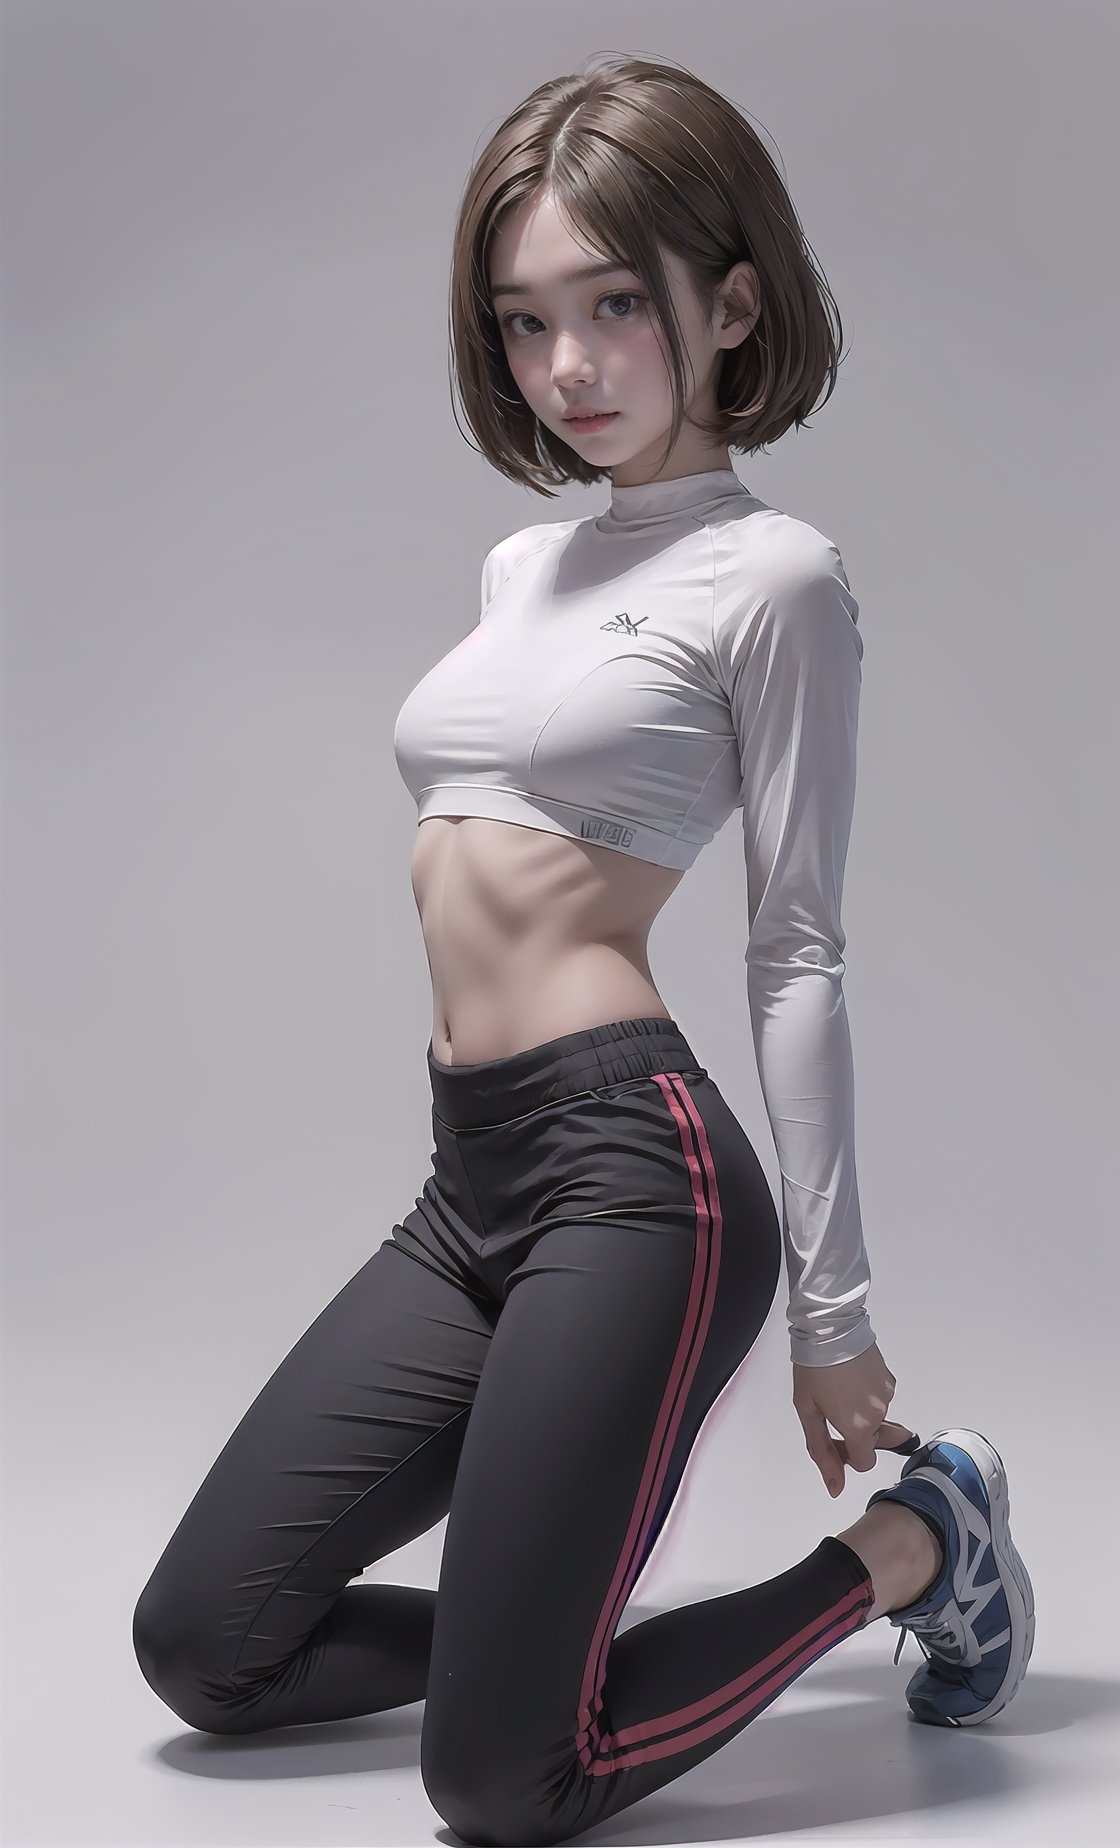 1  girl, slim ,full body view, showing front, small breasts, looking at viewer,  brown hair,  kneeling, nude, black short sport pants,  cropped long sleeve top, white background, 
